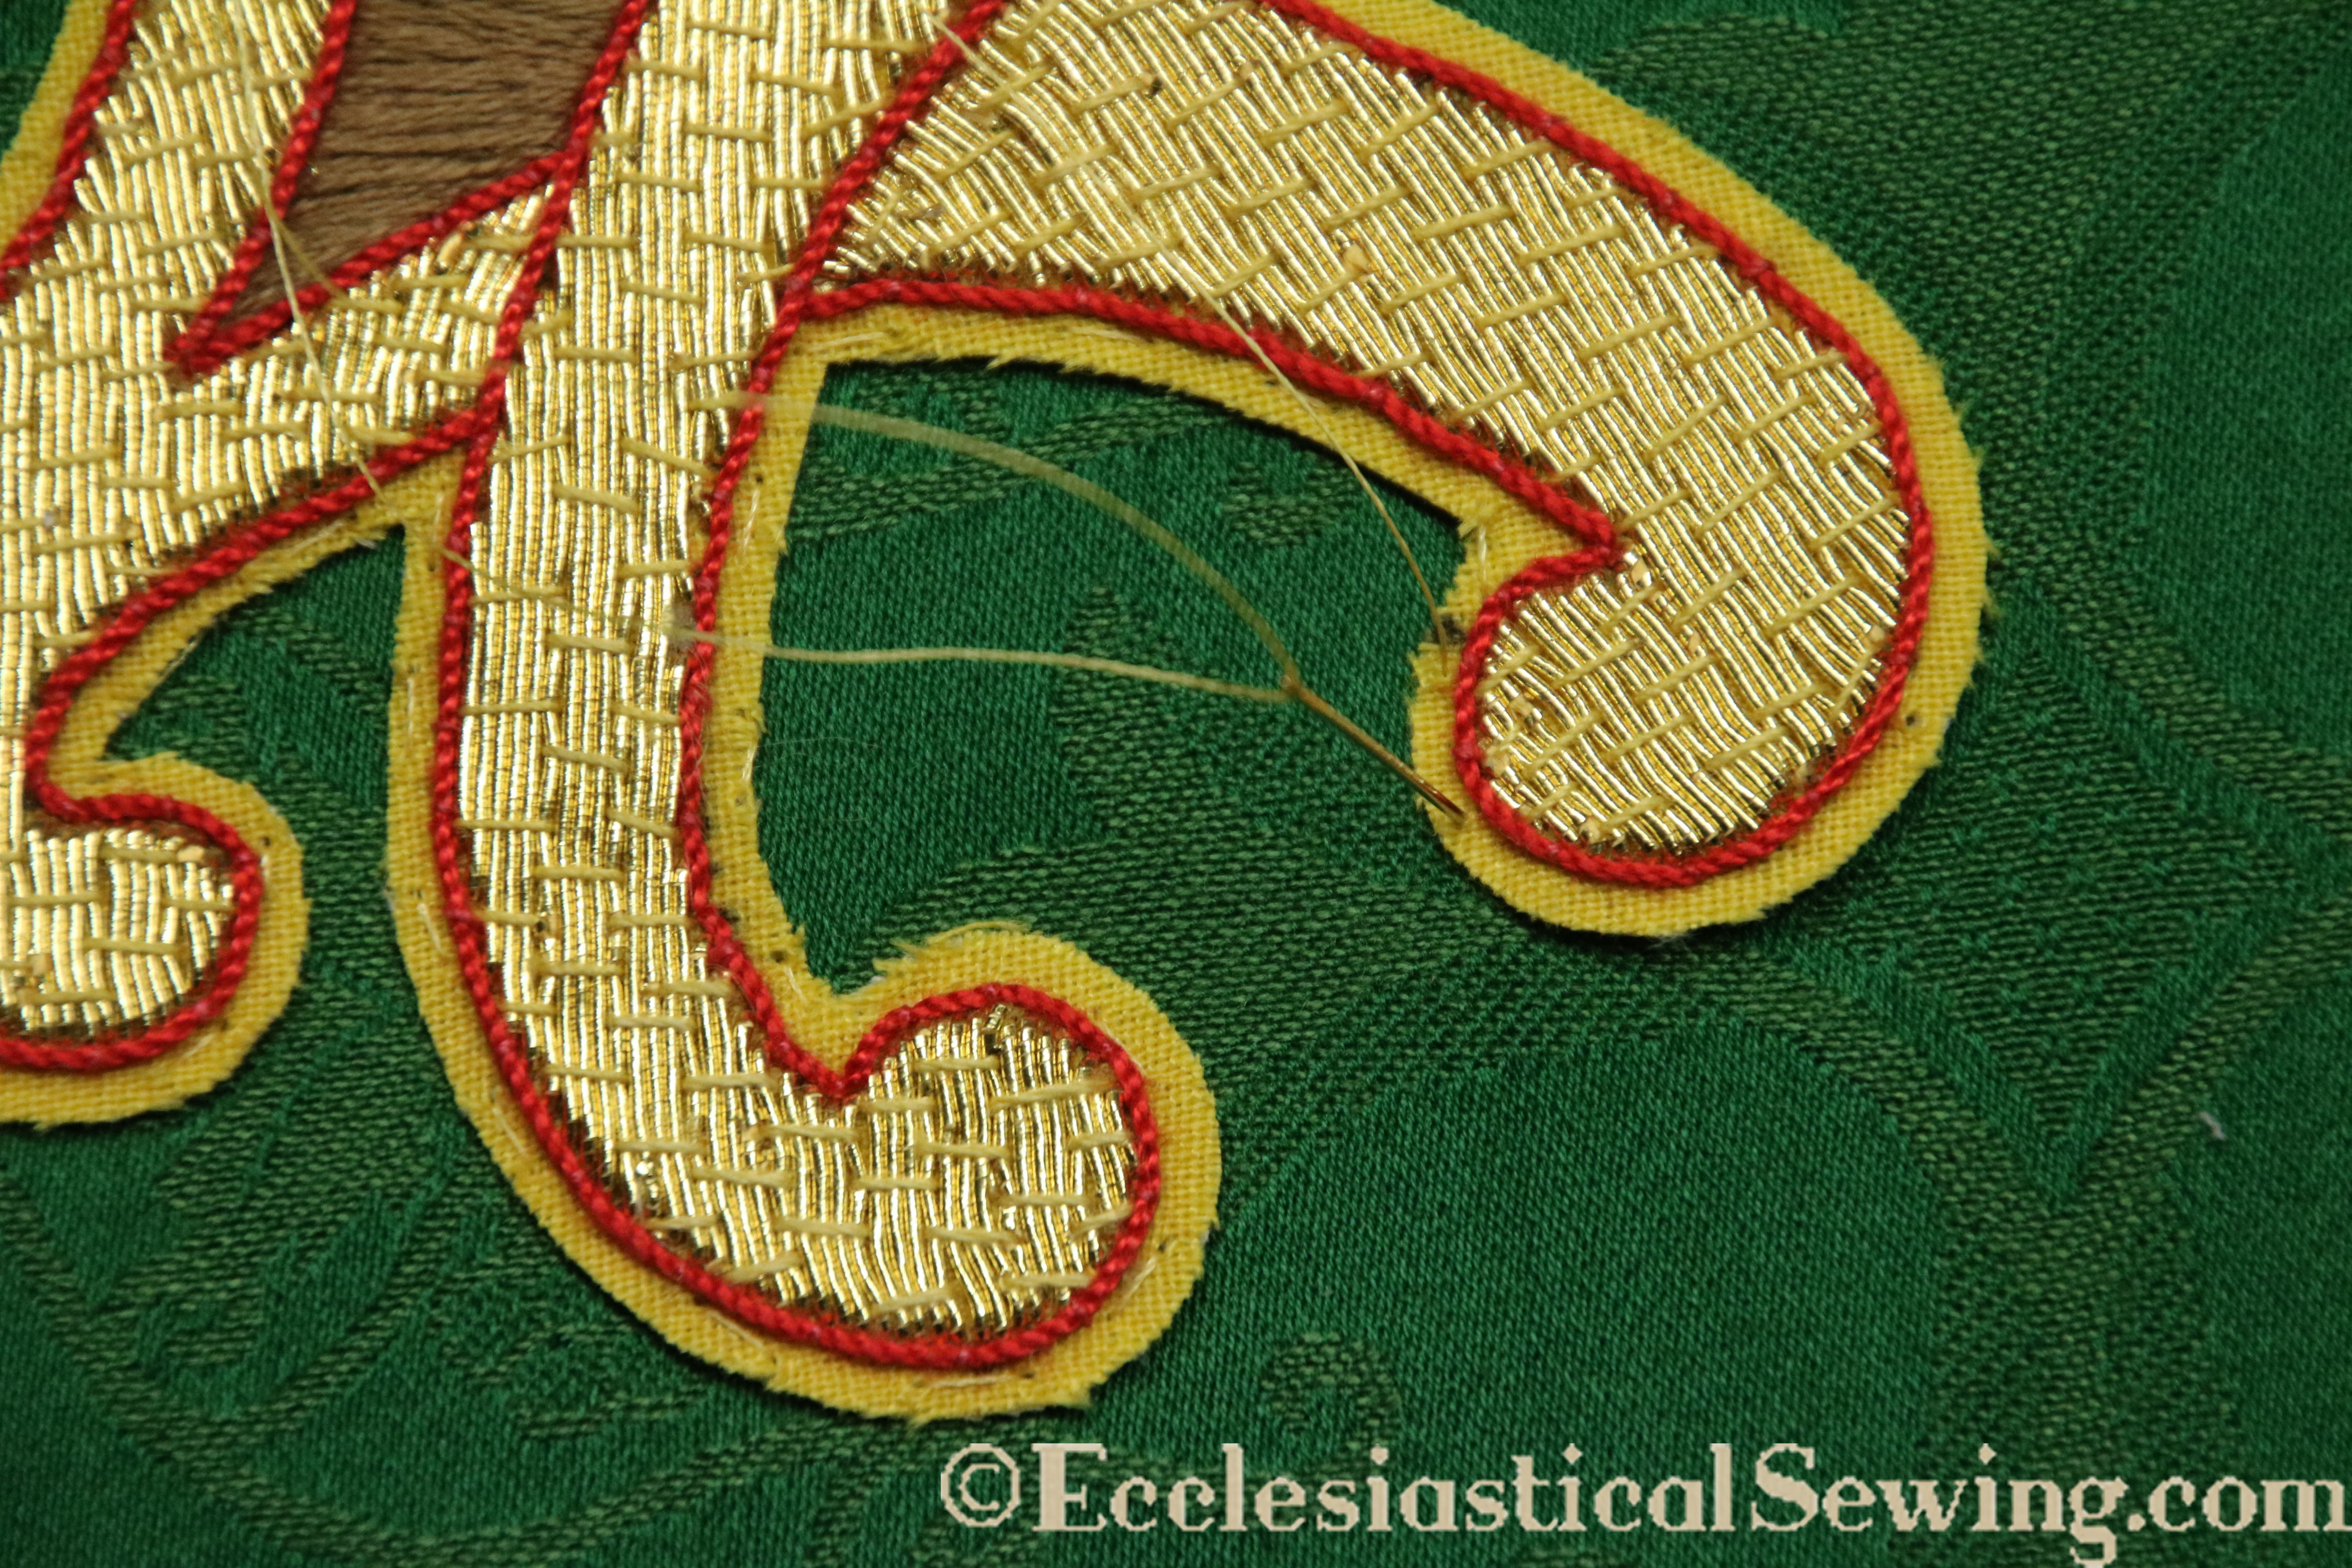 Ecclesiastical Embroidery Patterns Img8825 Ecclesiastical Sewing 2019